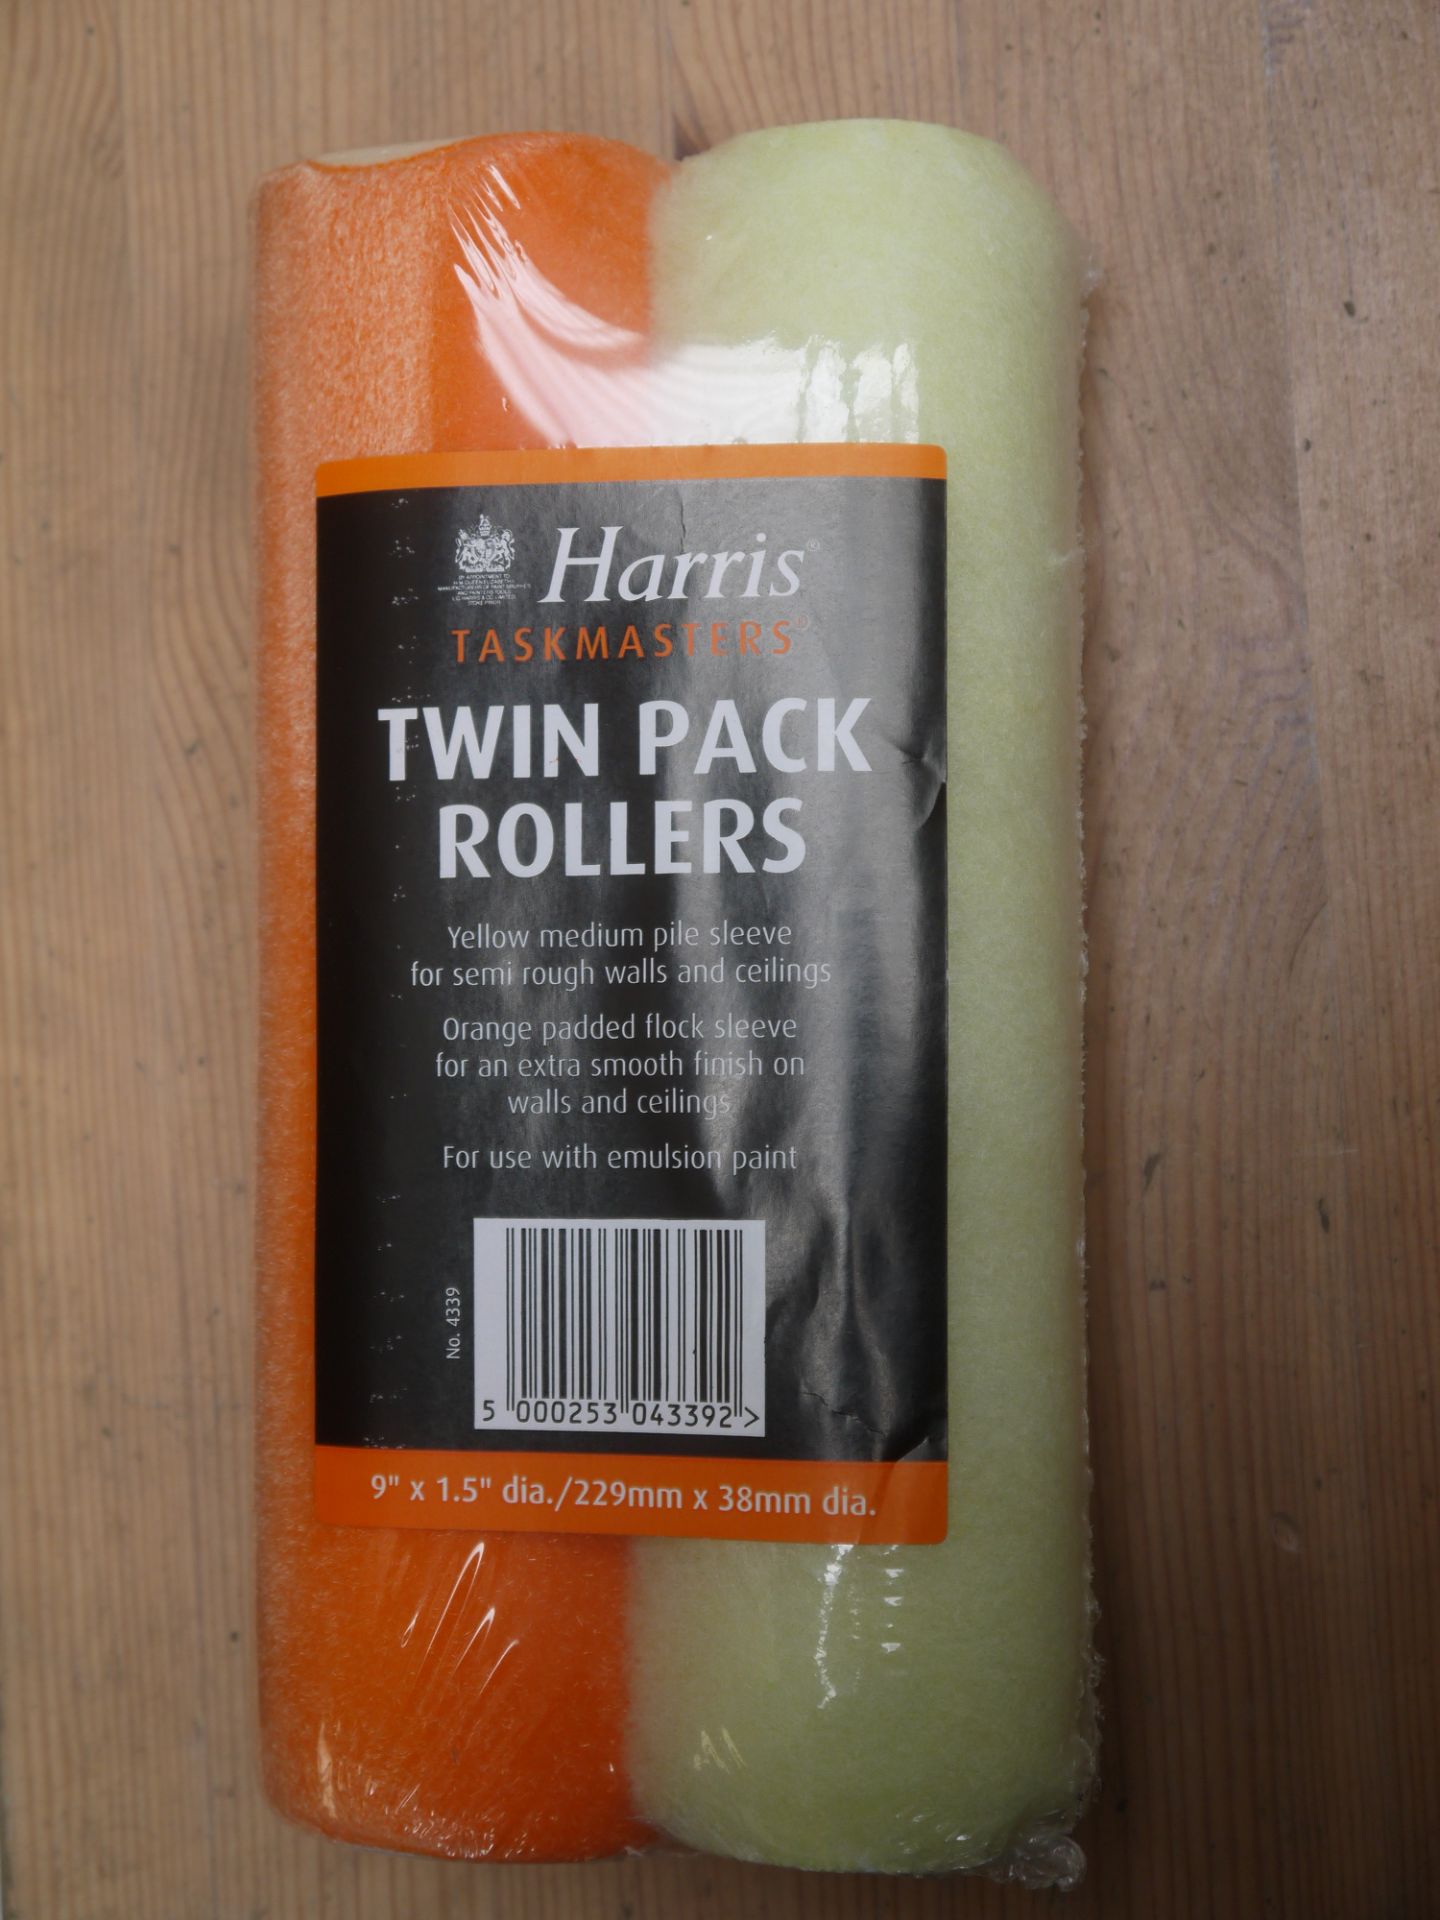 Harris Twin Pack Rollers (9'' x 1.5''), for use with emulsion paint. 1x Yellow Medium Pile Sleeve